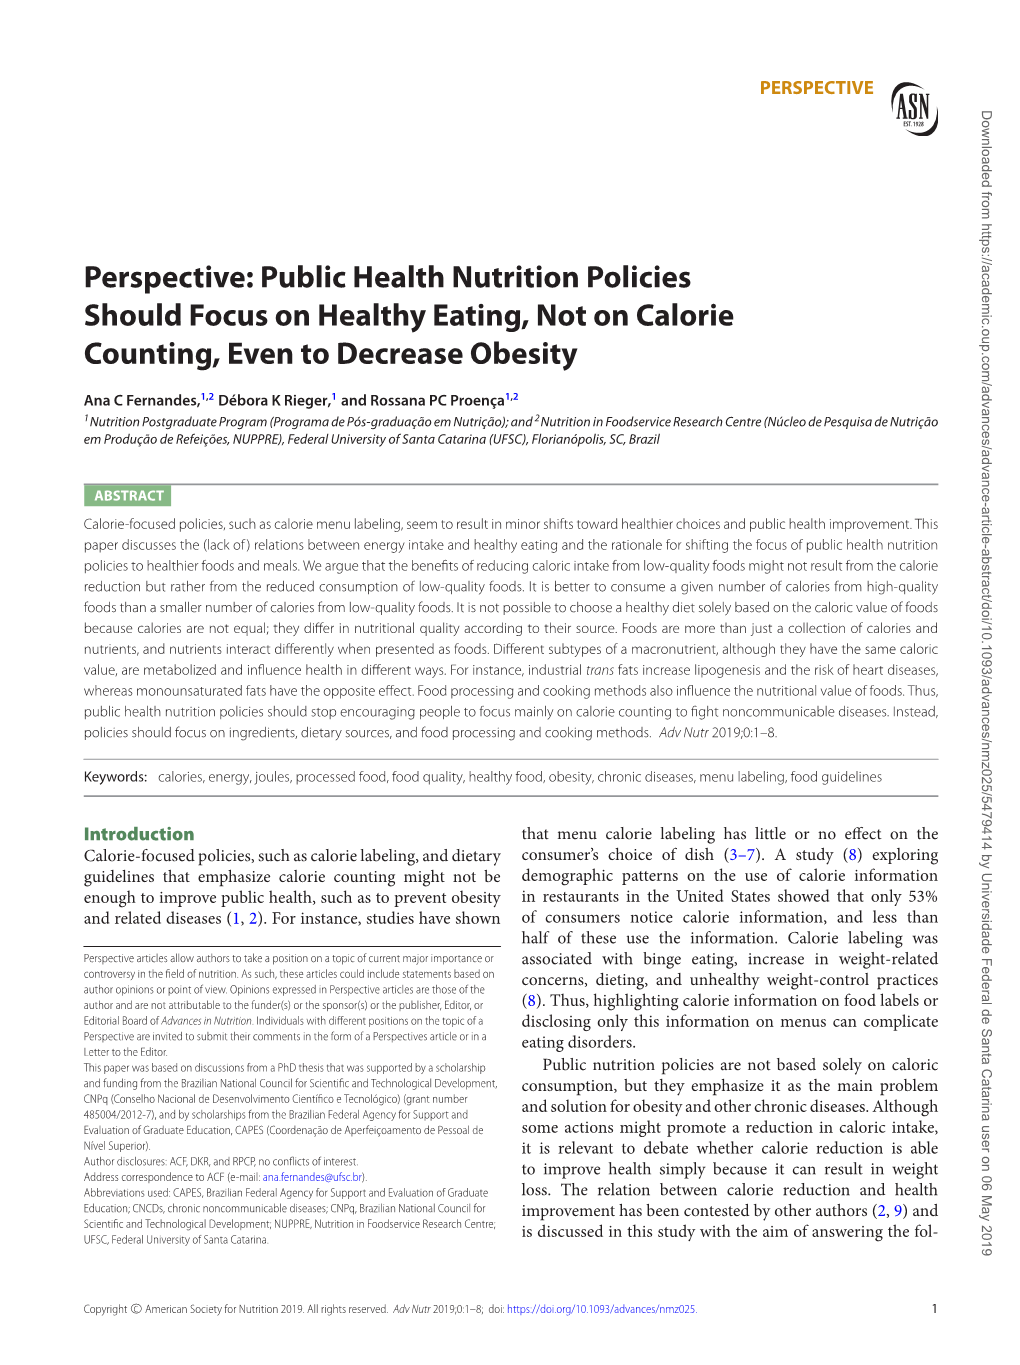 Perspective: Public Health Nutrition Policies Should Focus on Healthy Eating, Not on Calorie Counting, Even to Decrease Obesity